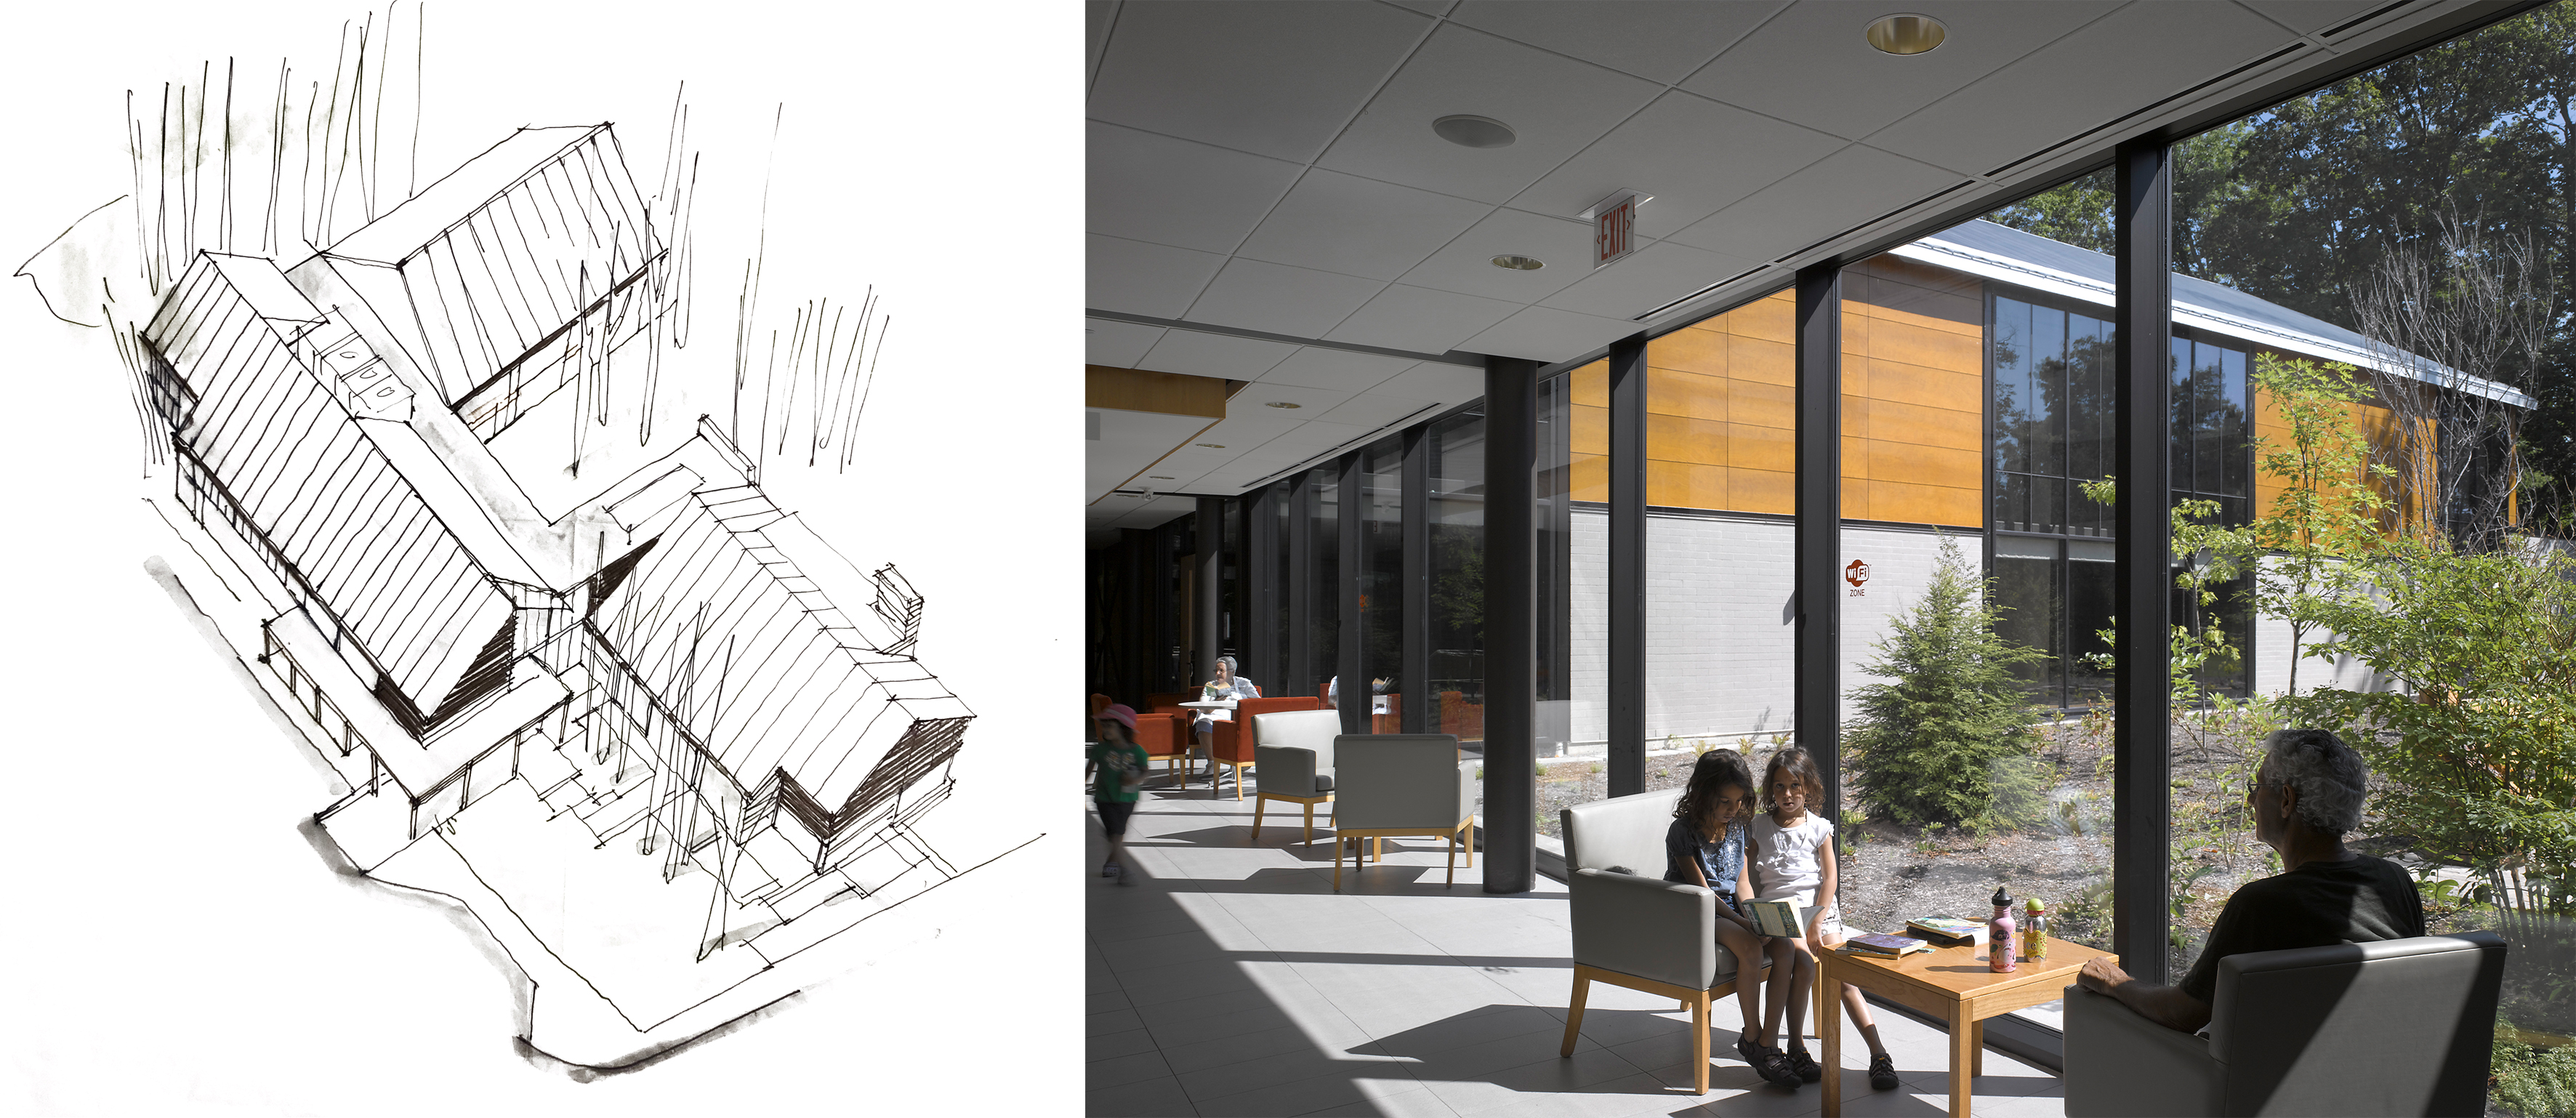 Left: Architect’s sketch of configuration of buildings on the site. Right: Views between different wings of the complex. Images courtesy of Perkins+Will Canada Inc.